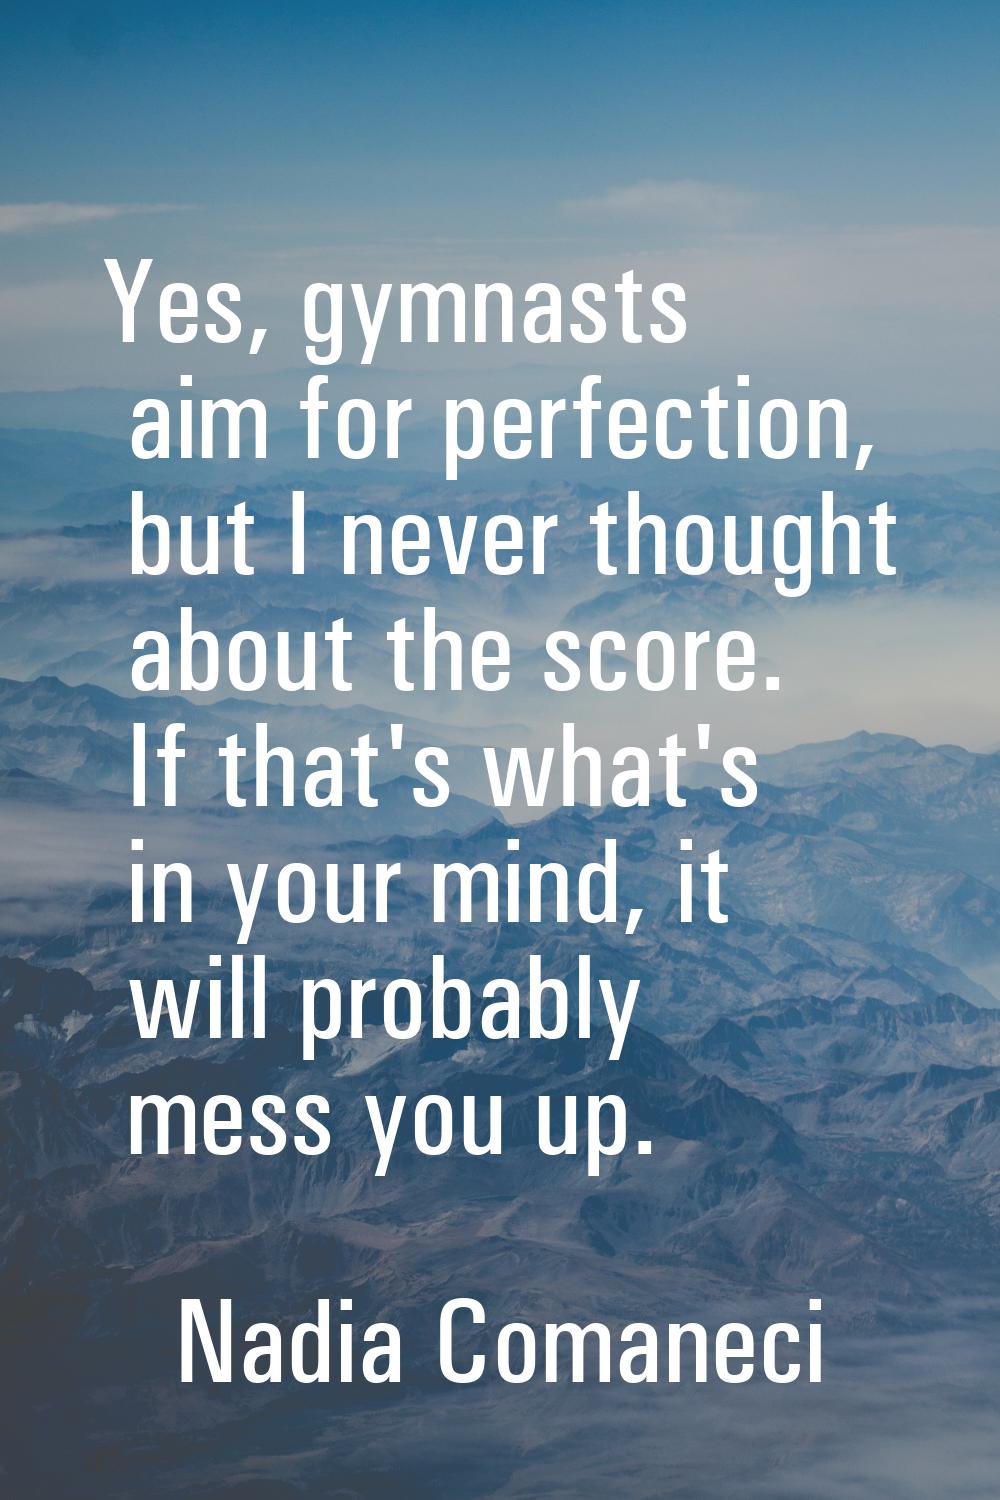 Yes, gymnasts aim for perfection, but I never thought about the score. If that's what's in your min